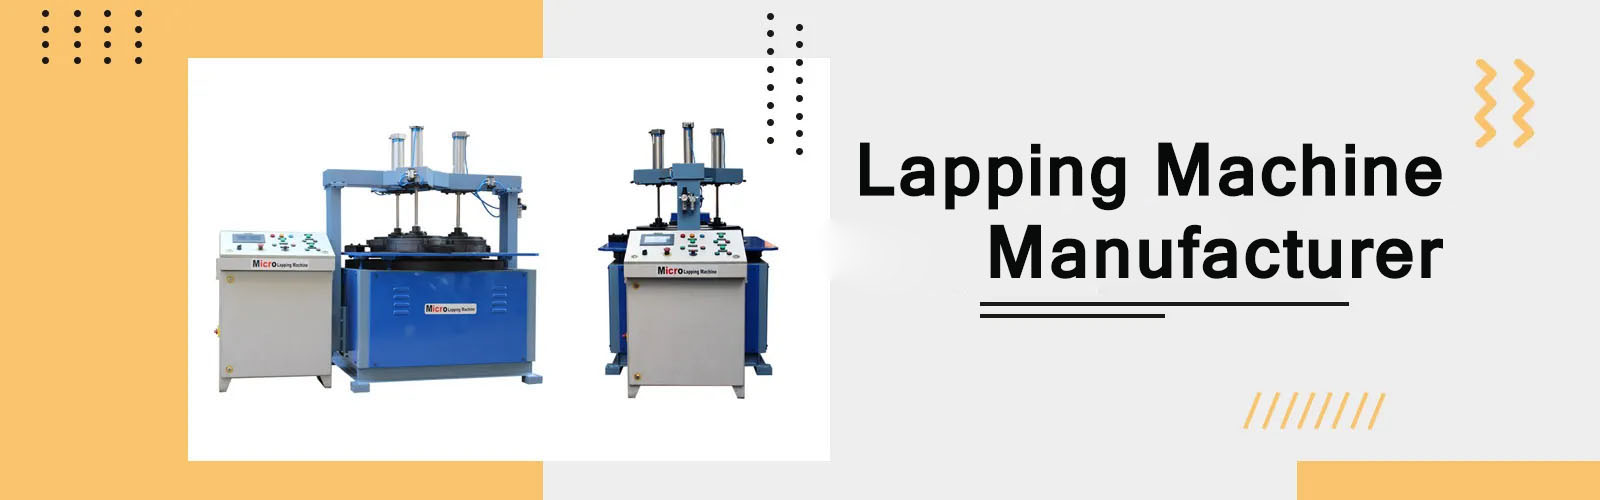 Lapping Machine Manufacturer in India